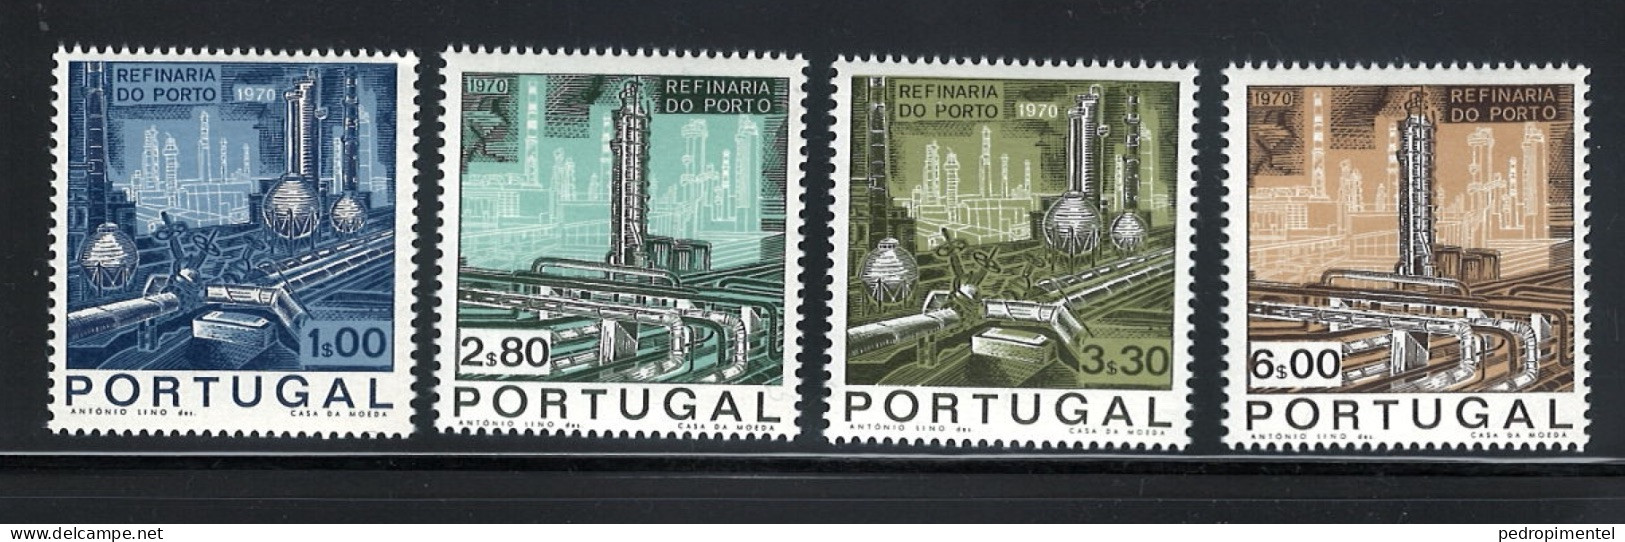 Portugal Stamps 1970 "Oporto Refinery" Condition MNH OG #1066-1069 - Nuovi